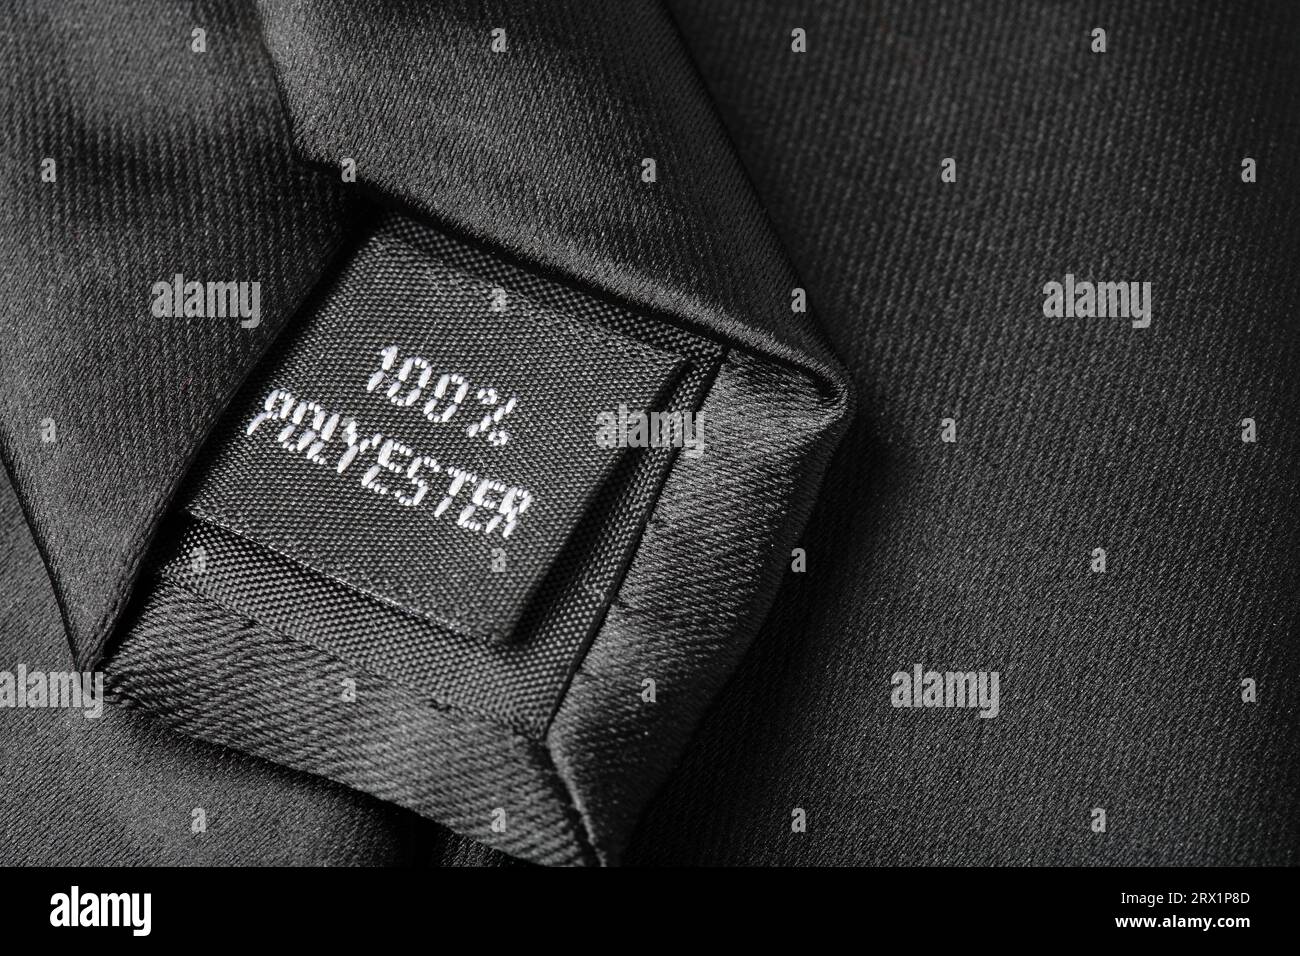 100% Polyester label on a tie Stock Photo